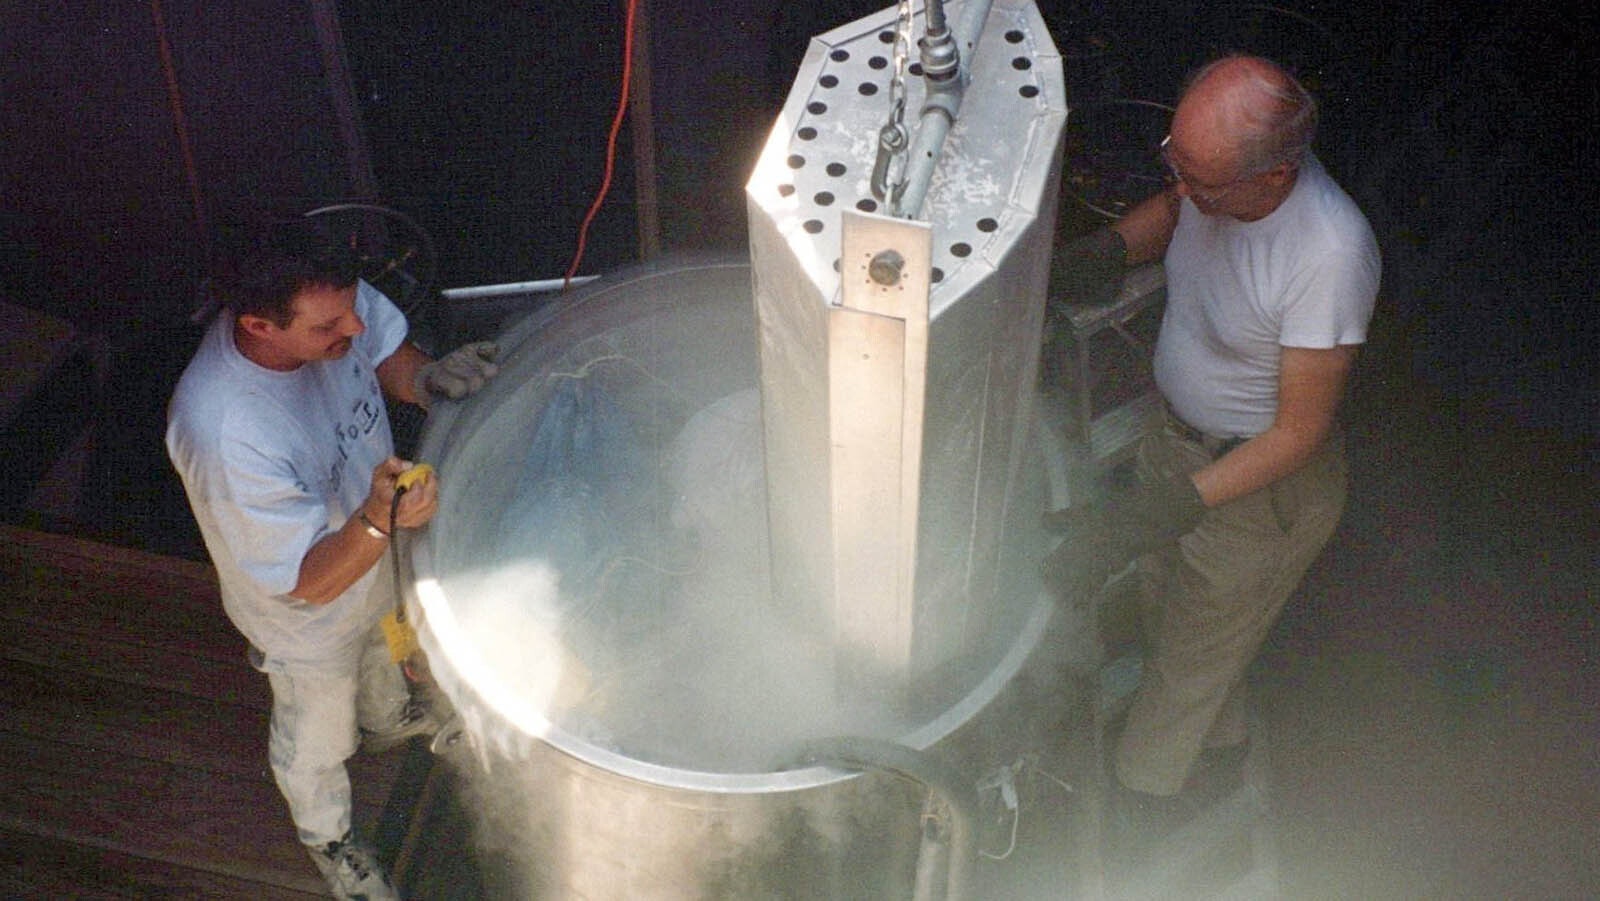 A pair of technicians lower a body into a cryonics vessel.